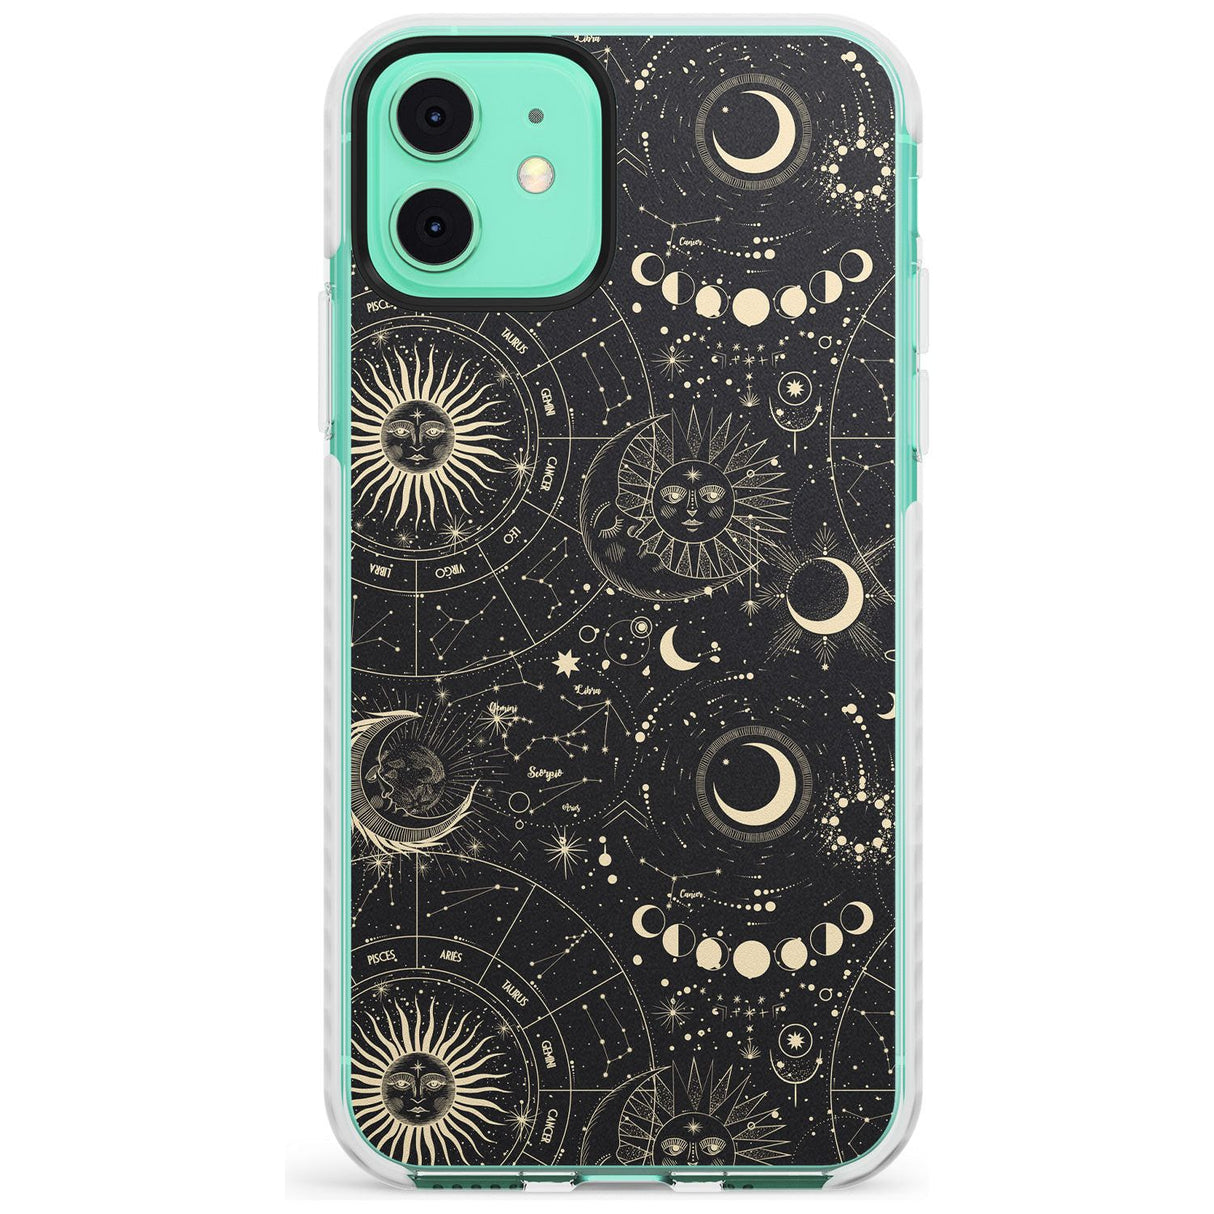 Suns, Moons & Star Signs Slim TPU Phone Case for iPhone 11